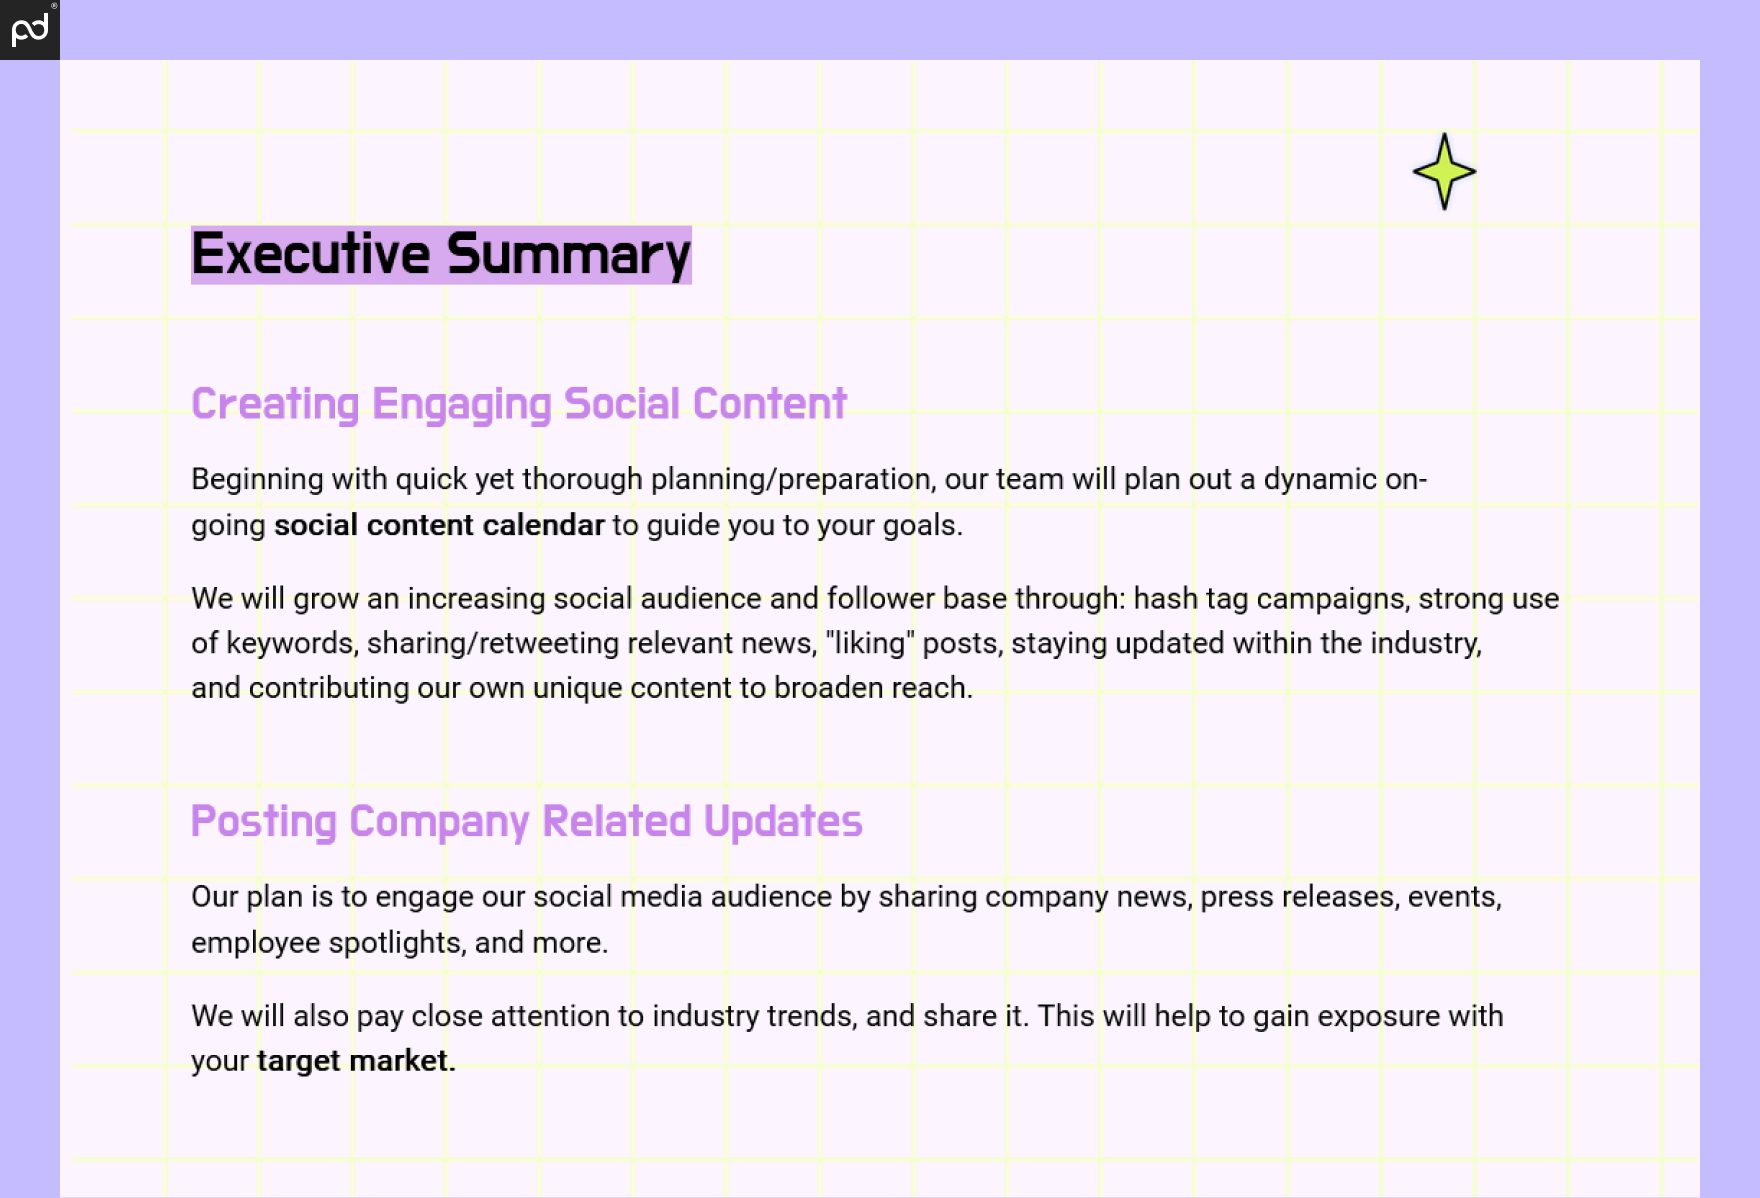 An image of an executive summary. Subheadings like “Create Engaging Social Content” and “Posting Company Related Updates” give high-level insight into the proposed solution.